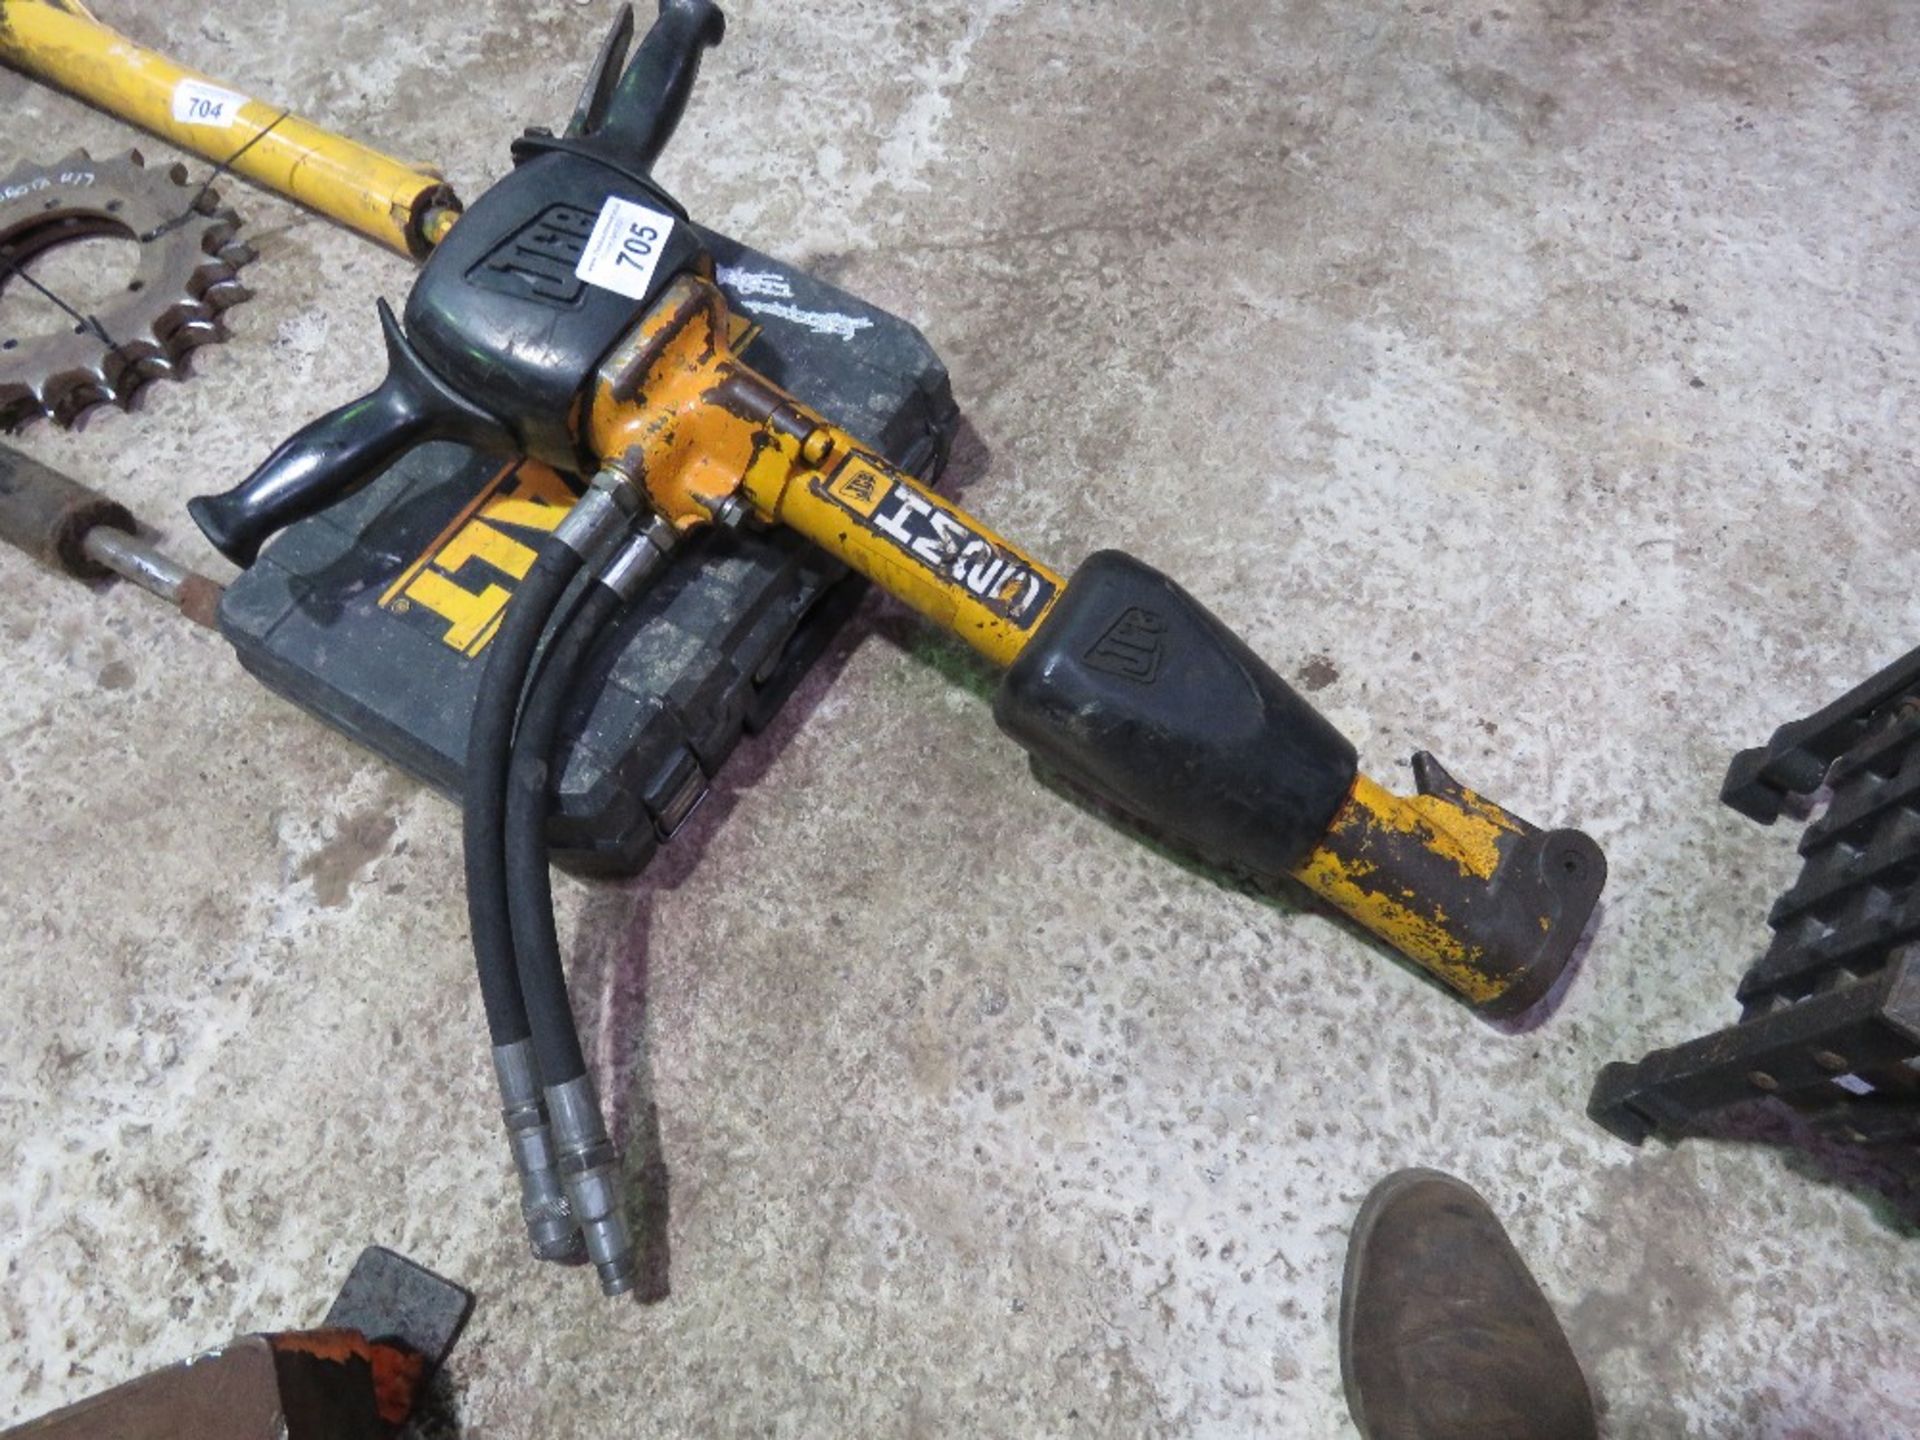 JCB HM25 HYDRAULIC BREAKER GUN PLUS A DEWALT 110VOLT DRILL.......THIS LOT IS SOLD UNDER THE AUCTIONE - Image 2 of 4